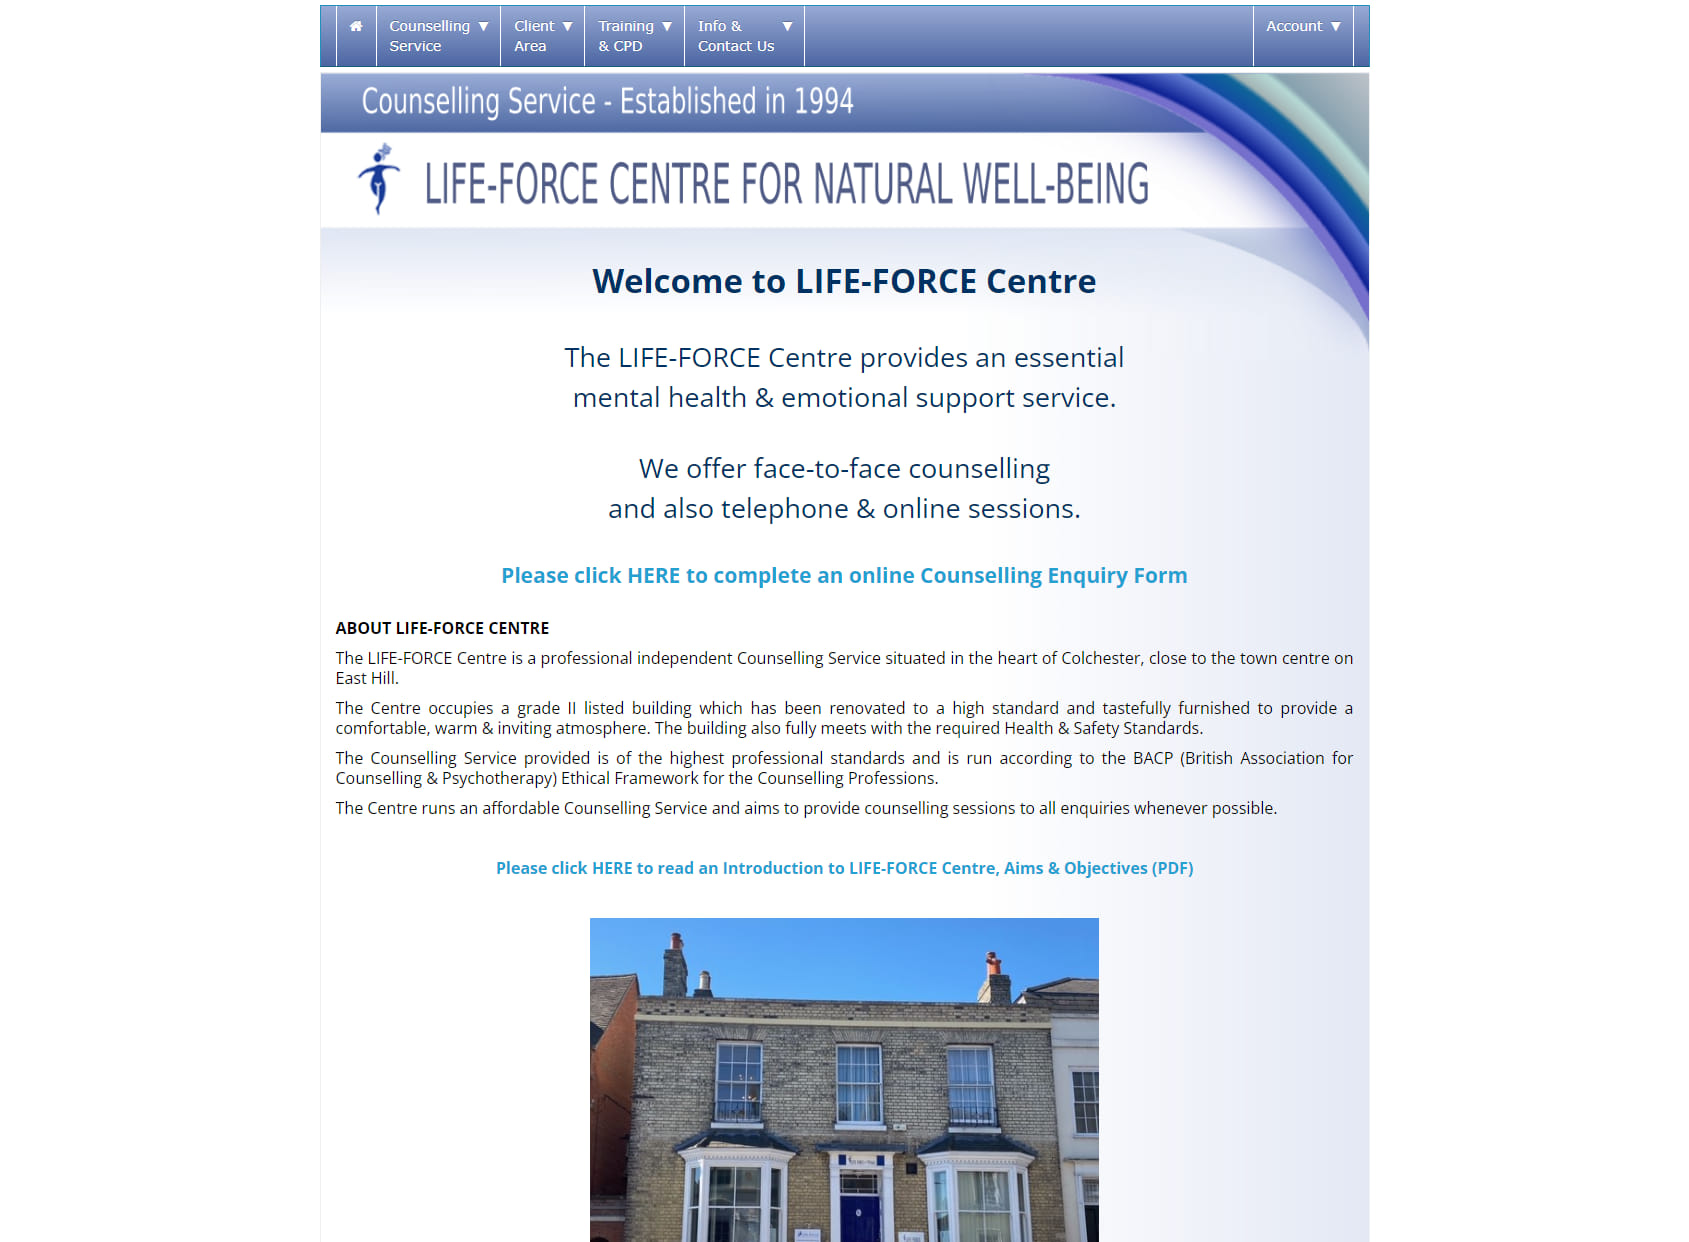 Life-Force Centre